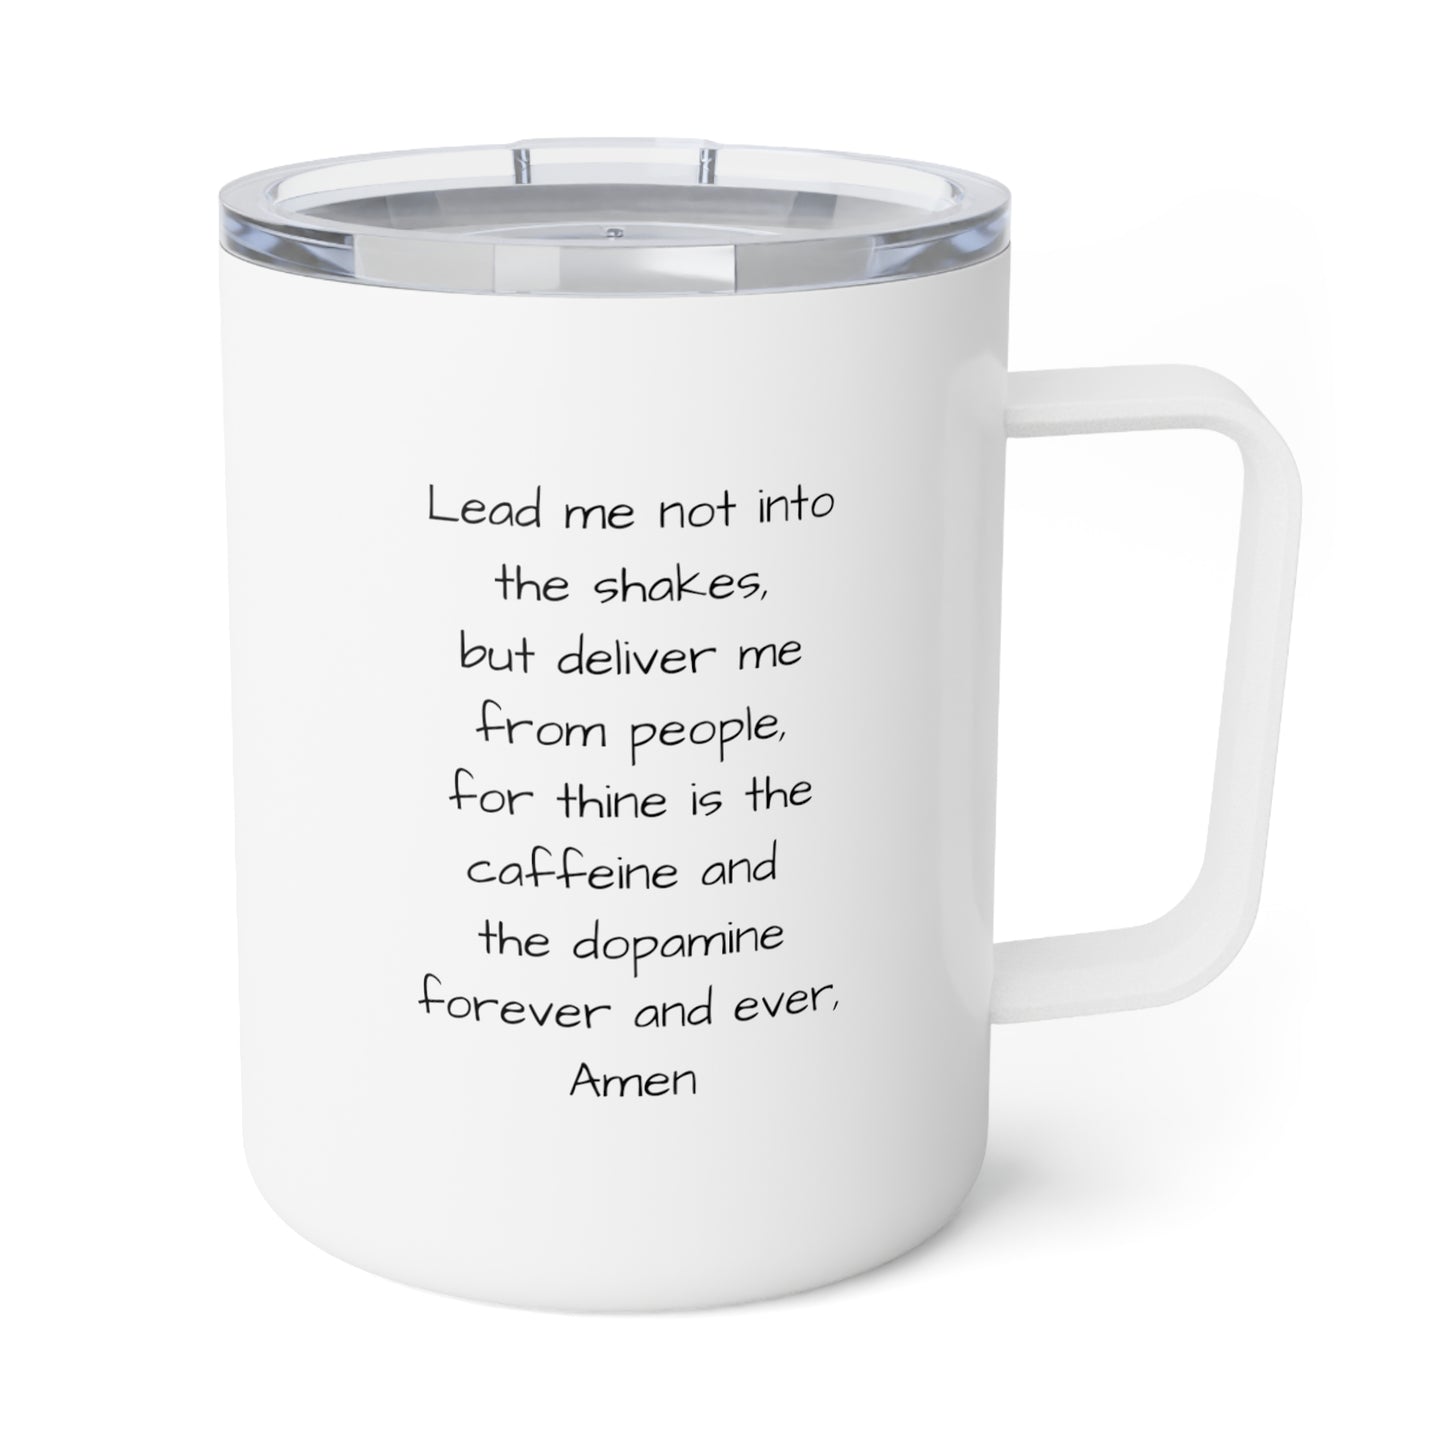 Frother, Spoon and Holy Roast | Lead me not into the shakes but deliver me from people | 10oz Stainless Steel insulated mug with lid